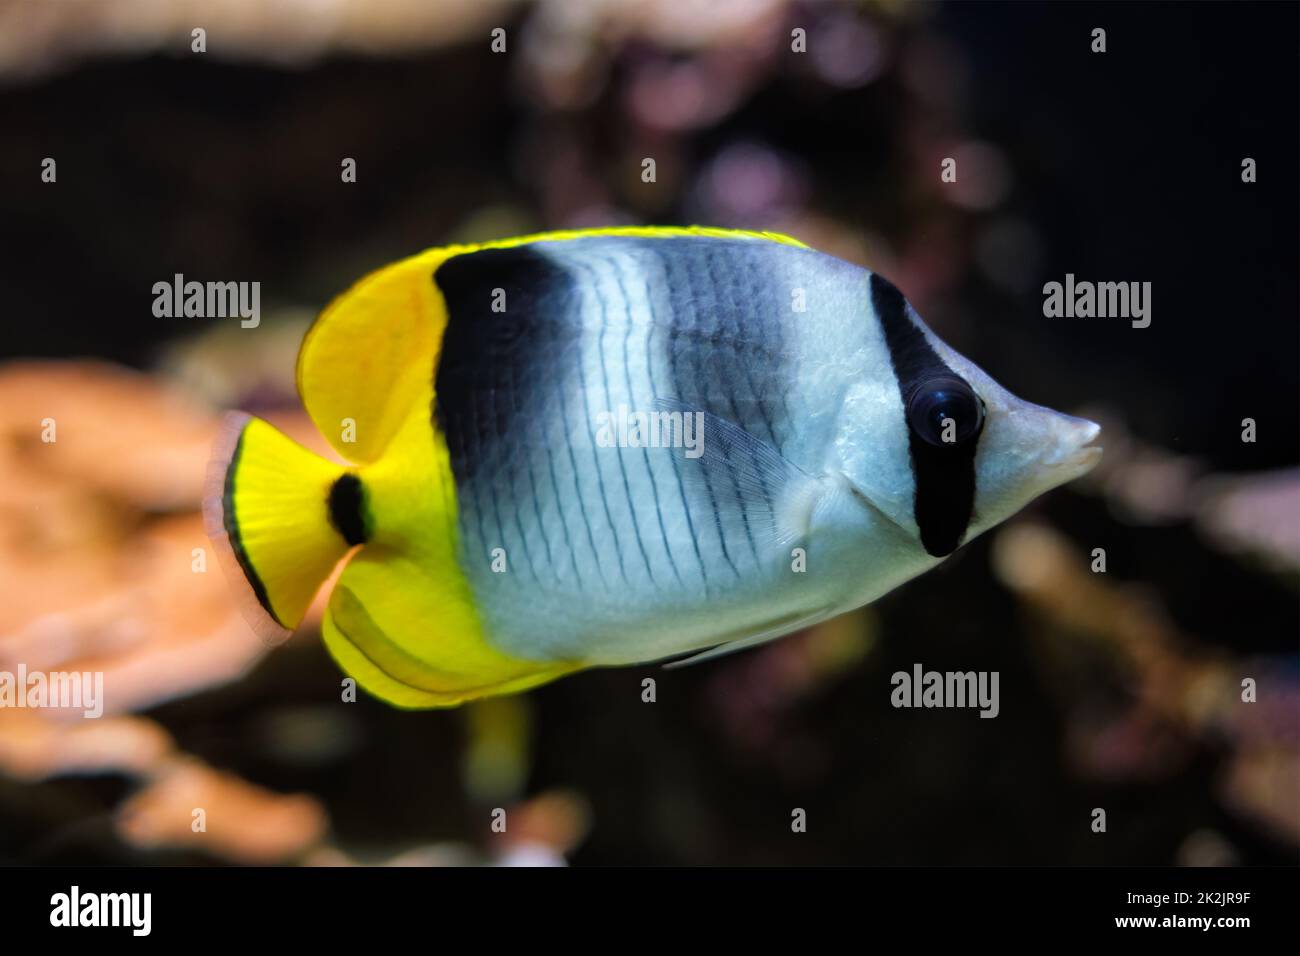 Pacific double-saddle butterflyfish Chaetodon ulietensis fish underwater in sea Stock Photo